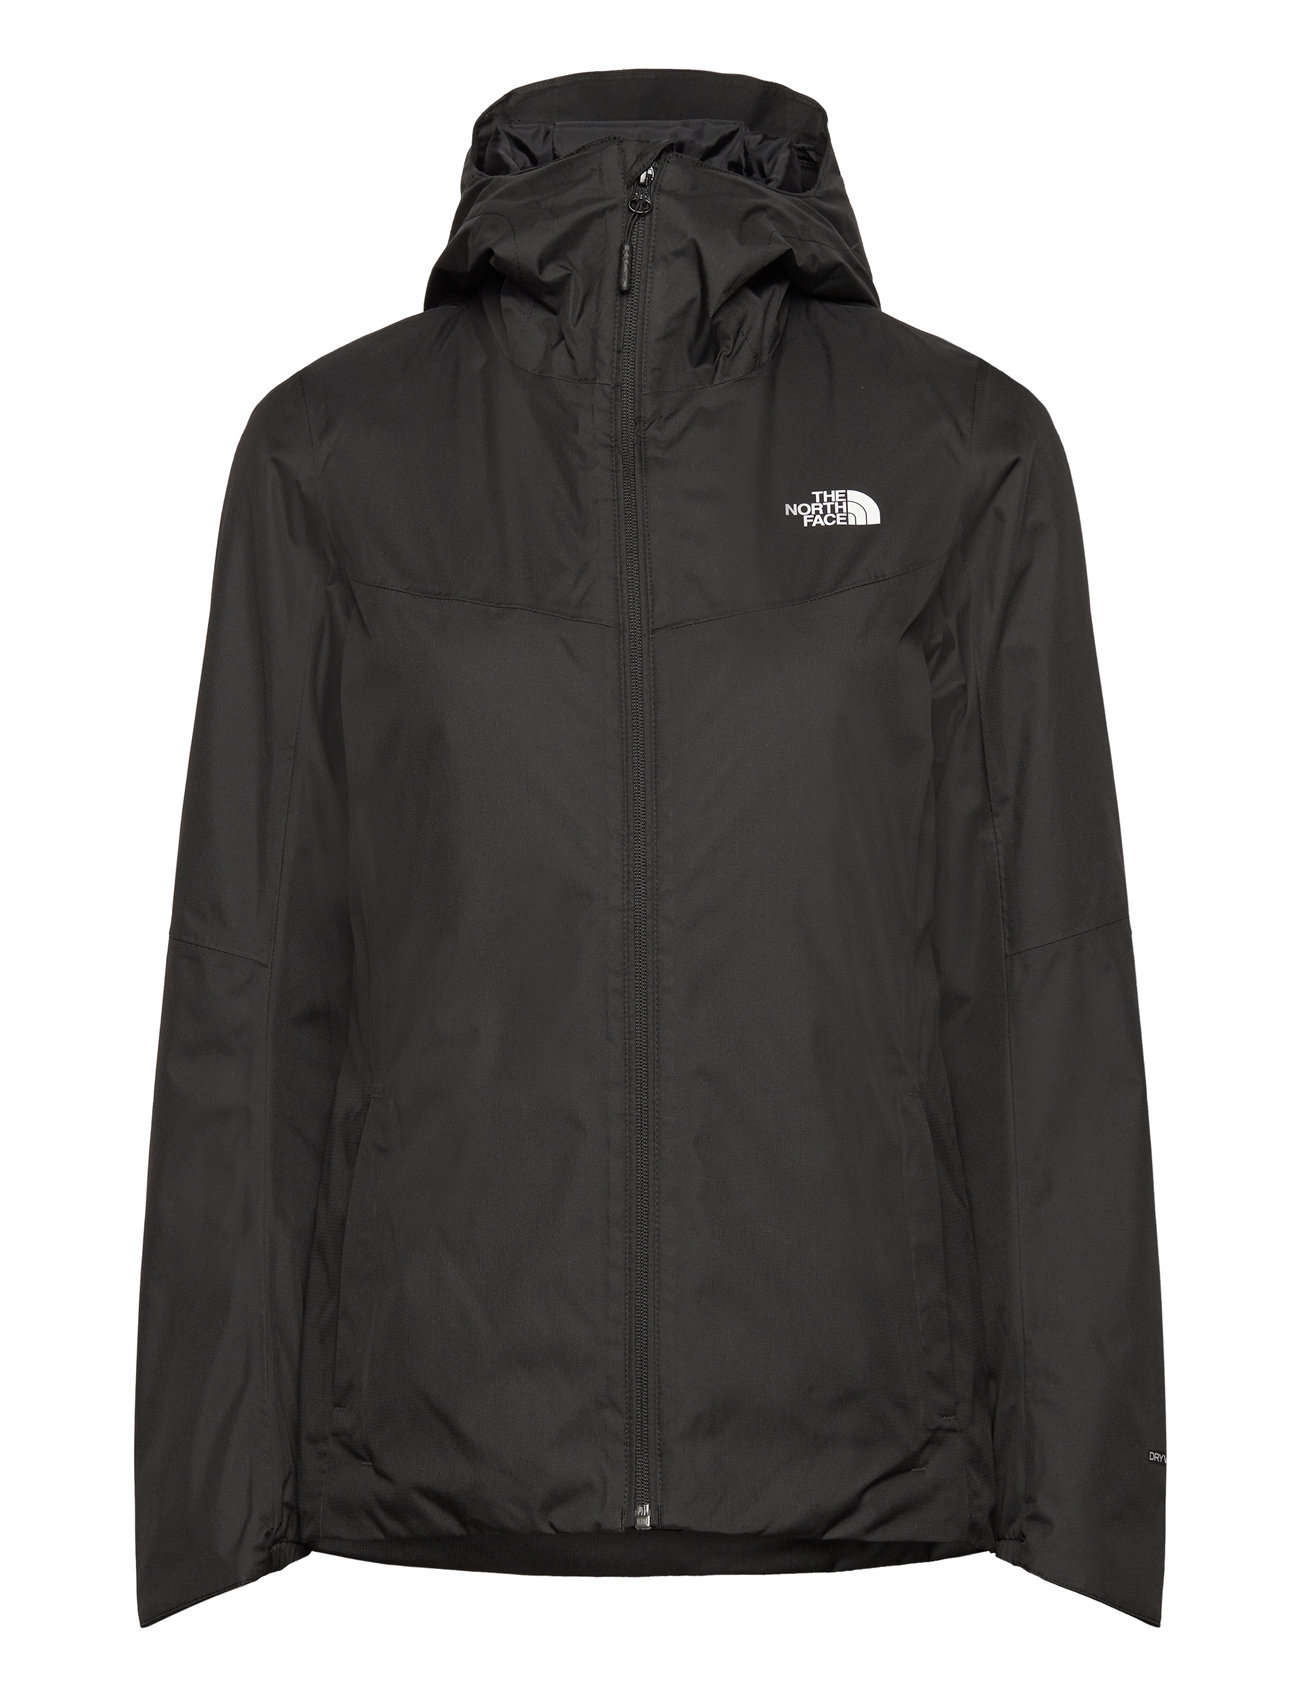 "The North Face" "W Quest Insulated Jacket - Eu Sport Jackets Black The